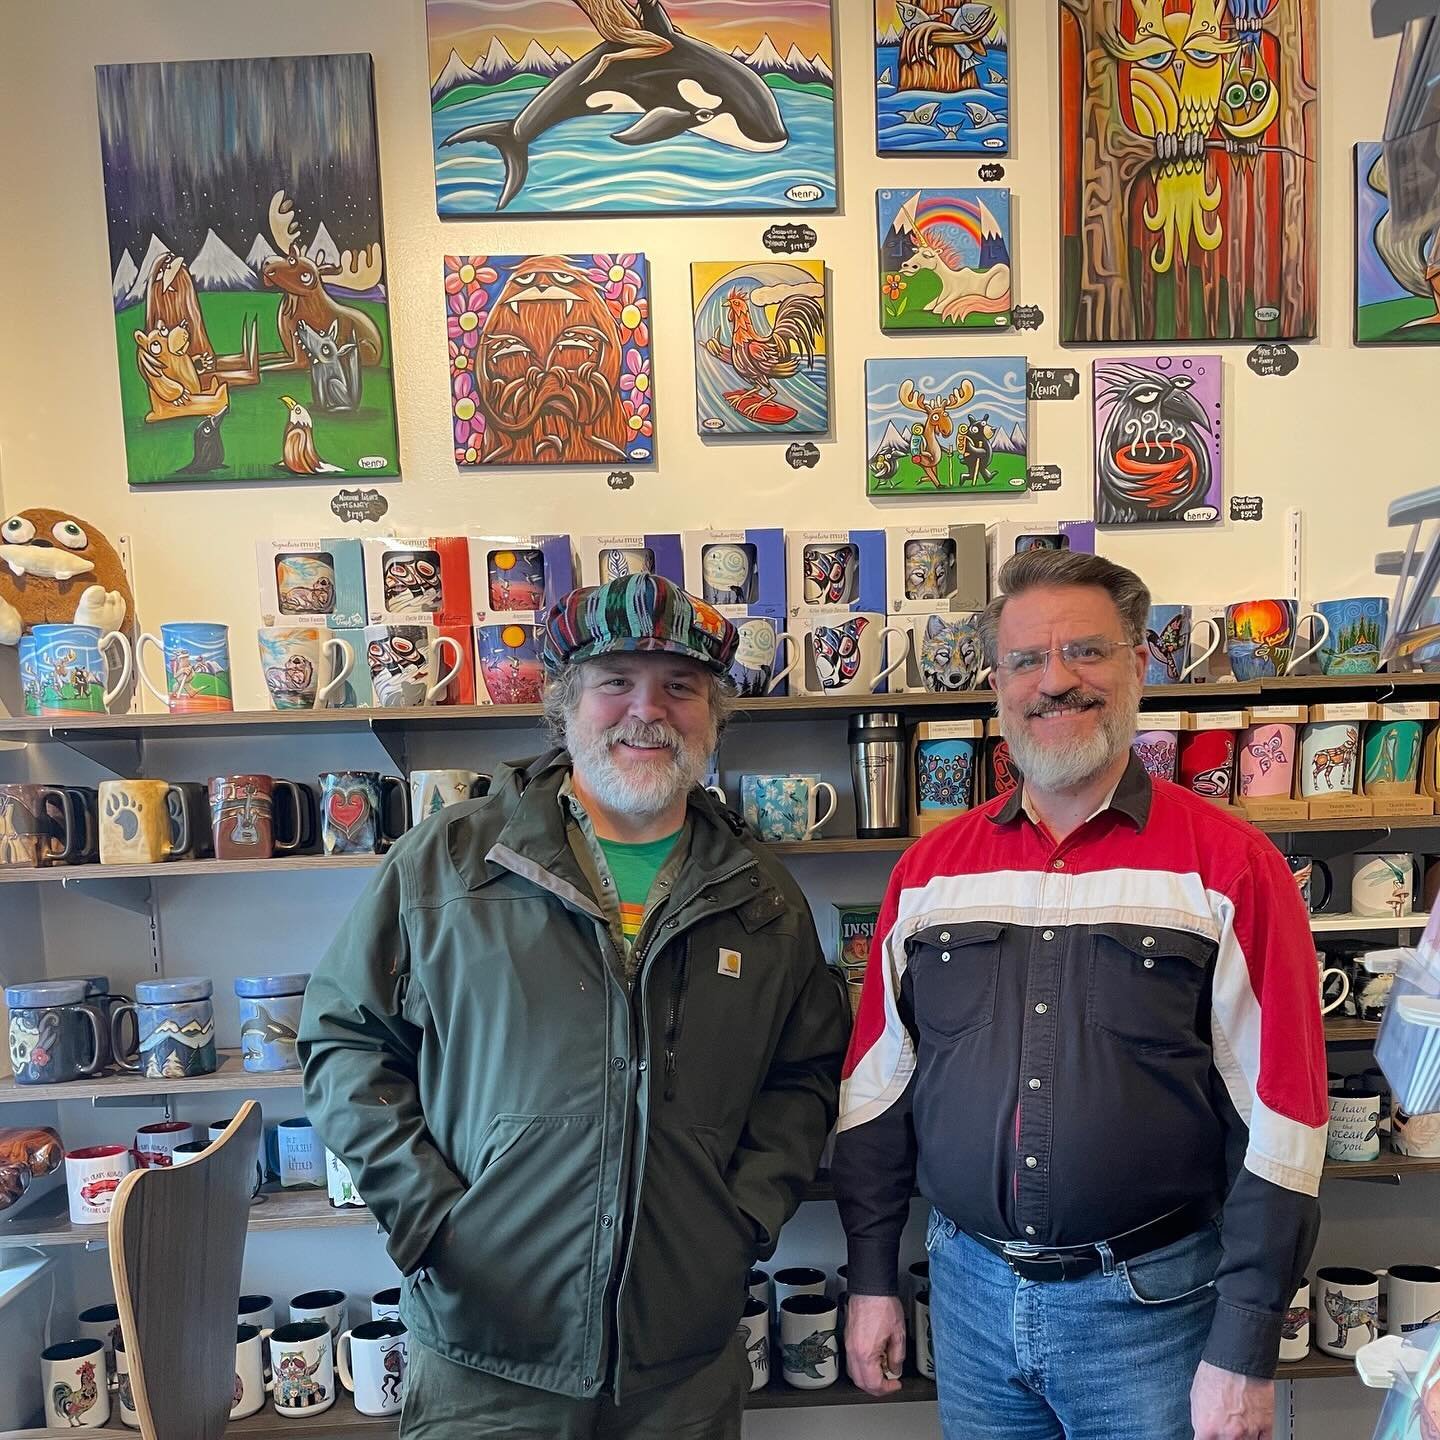 🎨✨ Surprise Visit Alert! 🎨✨

Guess who dropped by Raven's Cup today? None other than Henry (Ryan Henry Ward), Western Washington's favorite muralist! 🌟 What a delightful surprise! 😍✨ We're buzzing with excitement and hoping to host a spectacular 